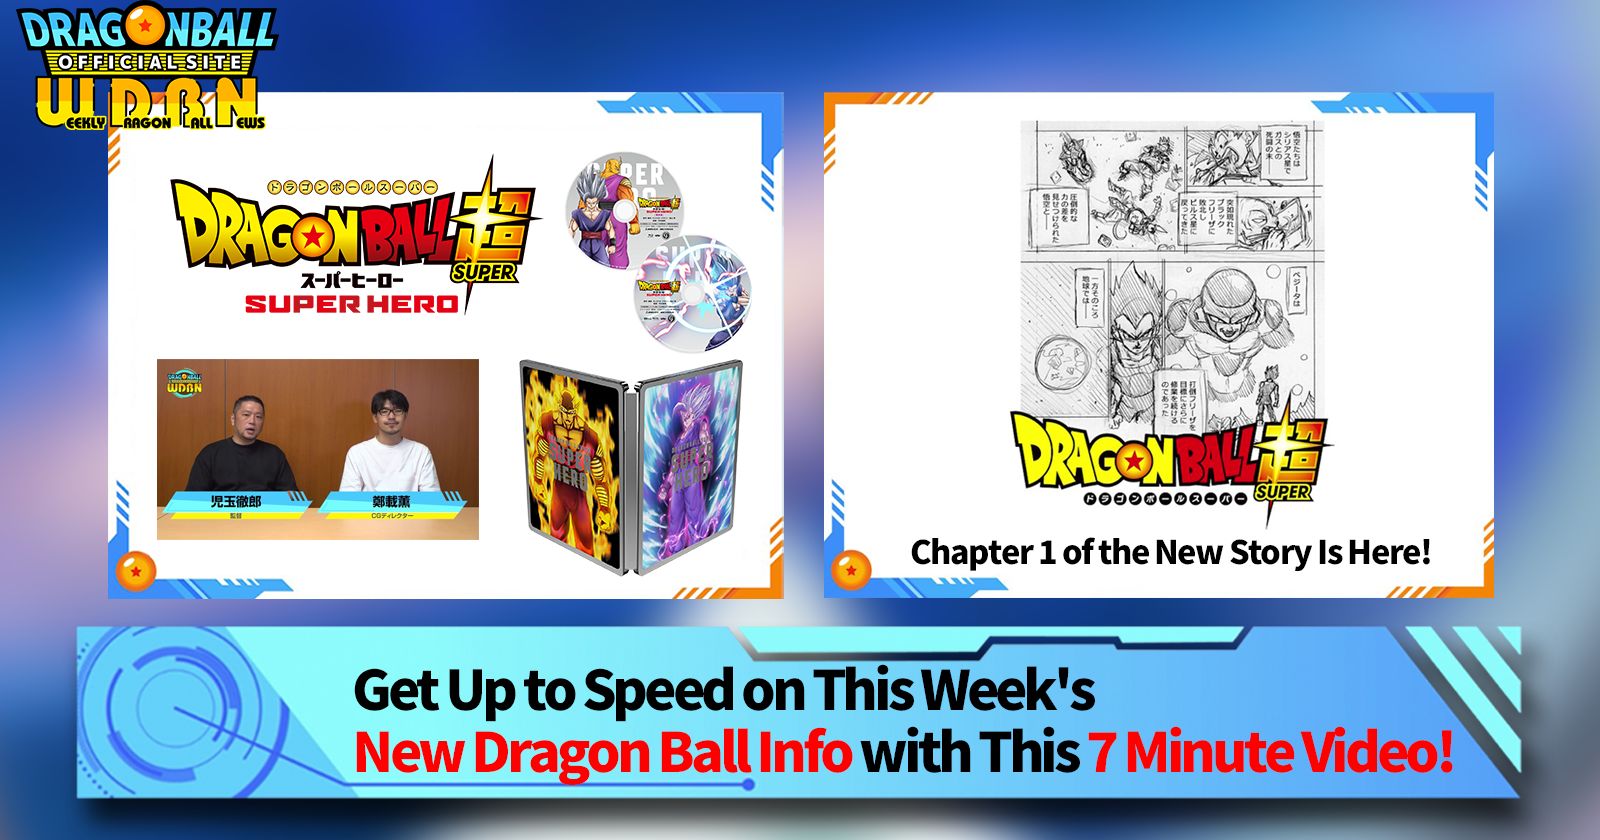 [December 12th] Weekly Dragon Ball News Broadcast!